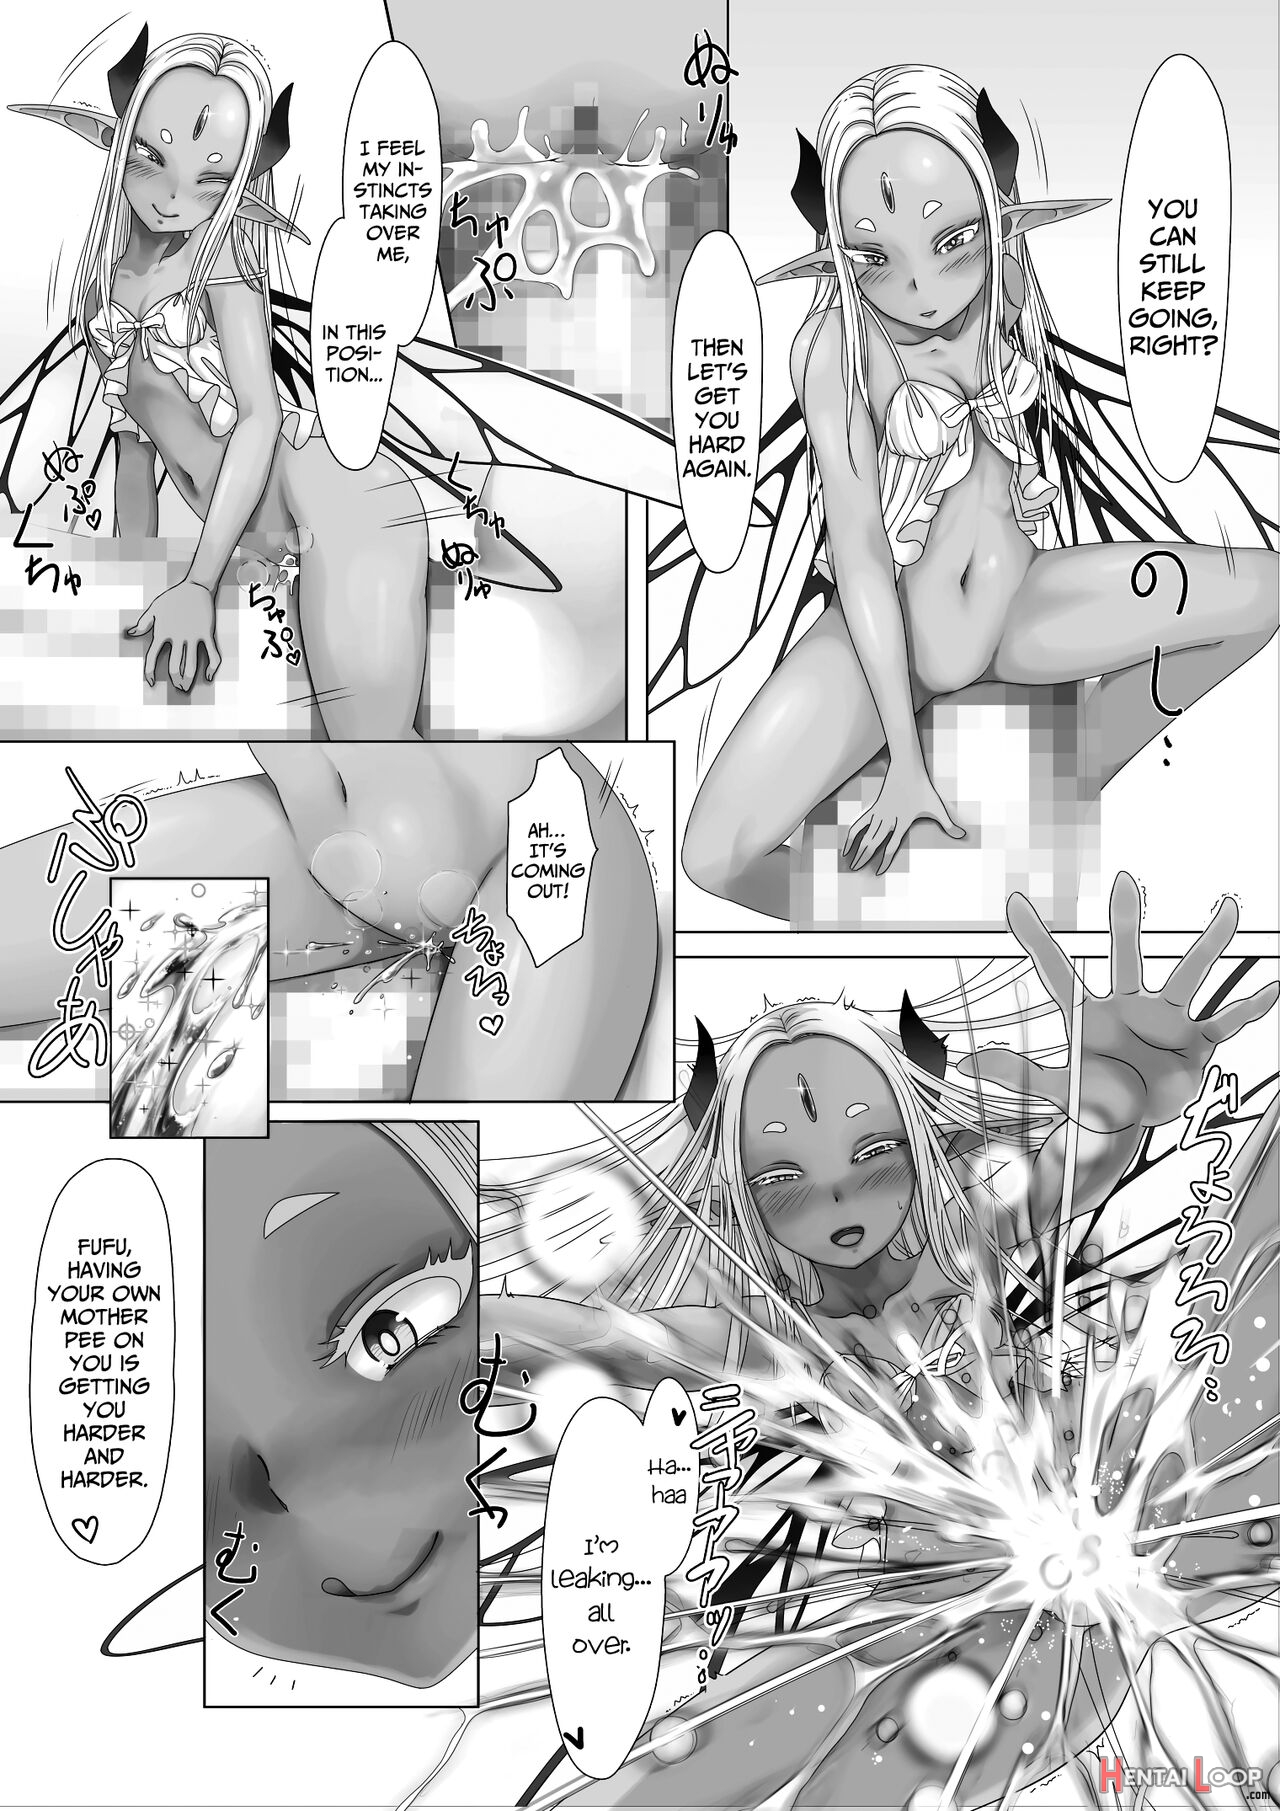 the Story Of A Fairy Mother Mating With Her Son Until She's Pregnant With His Child page 12